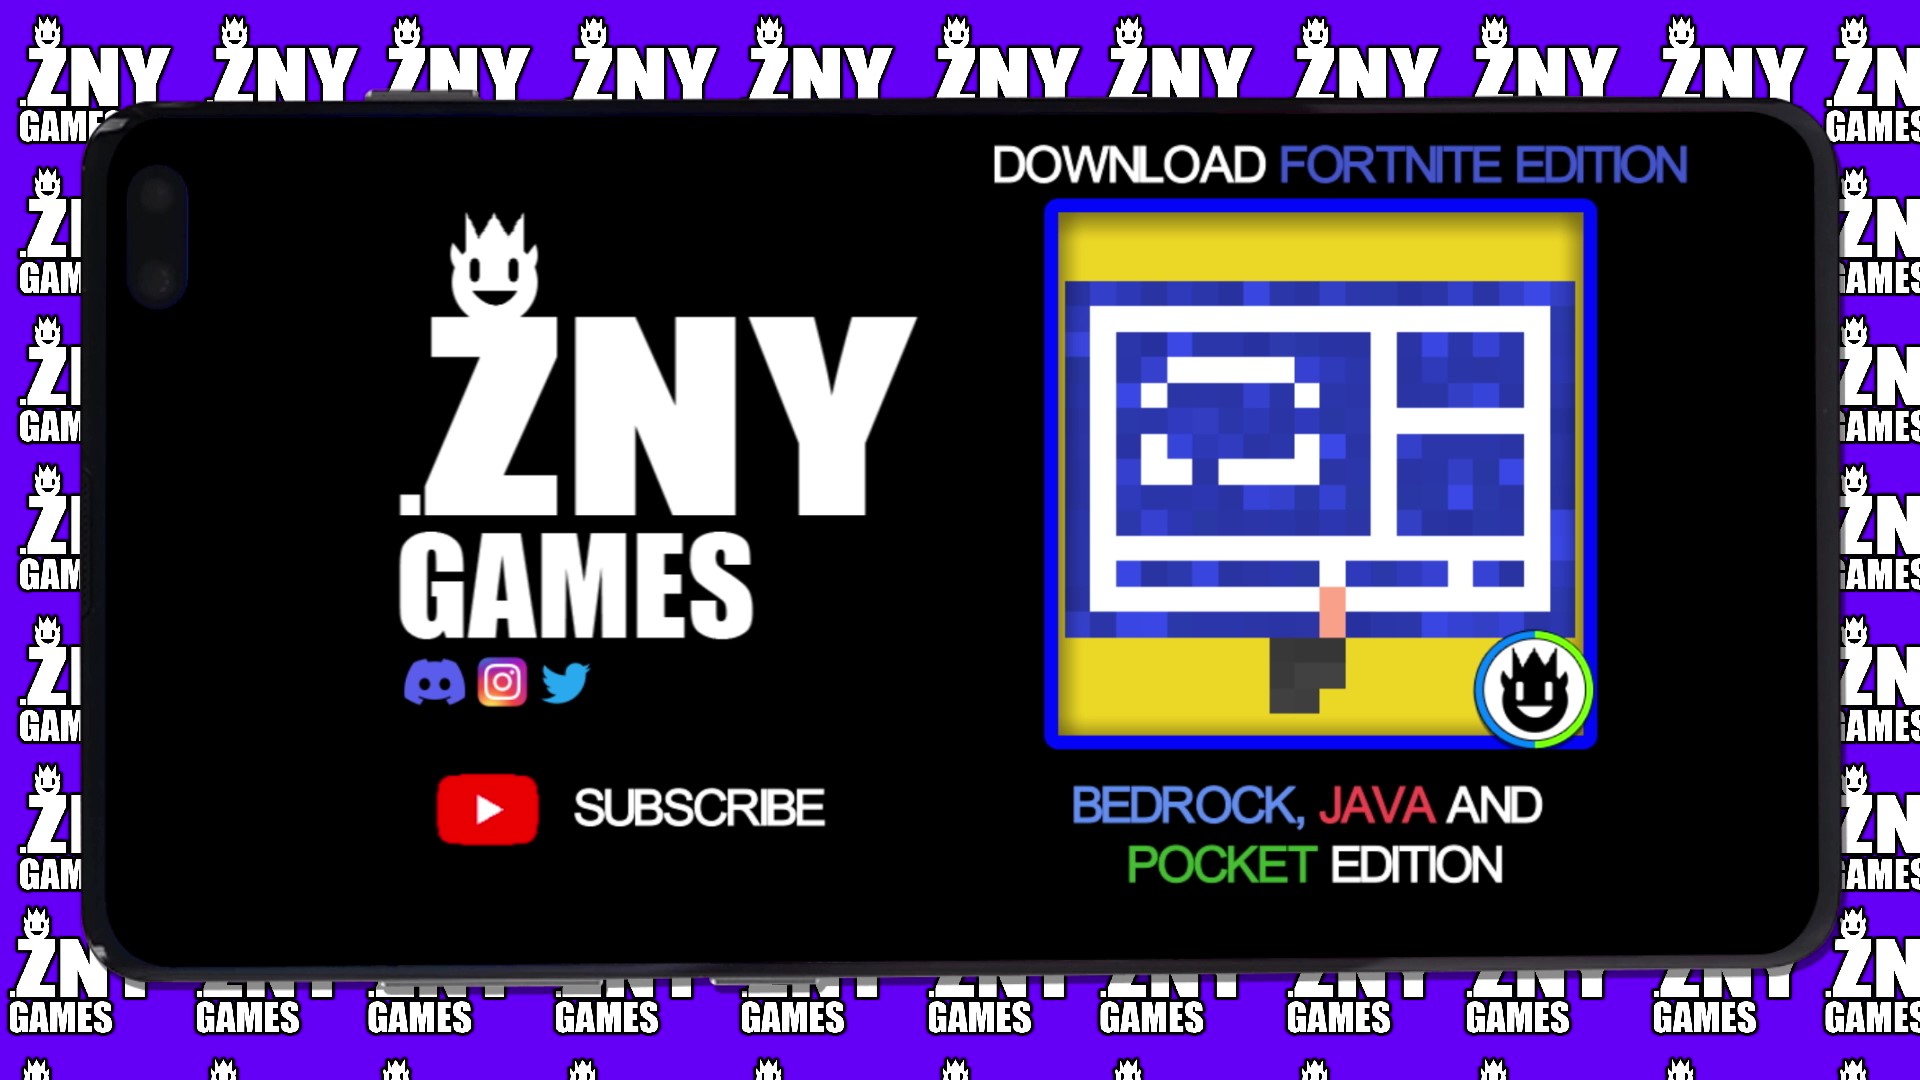 znygames gui texturepack fortnite edition android ios - download